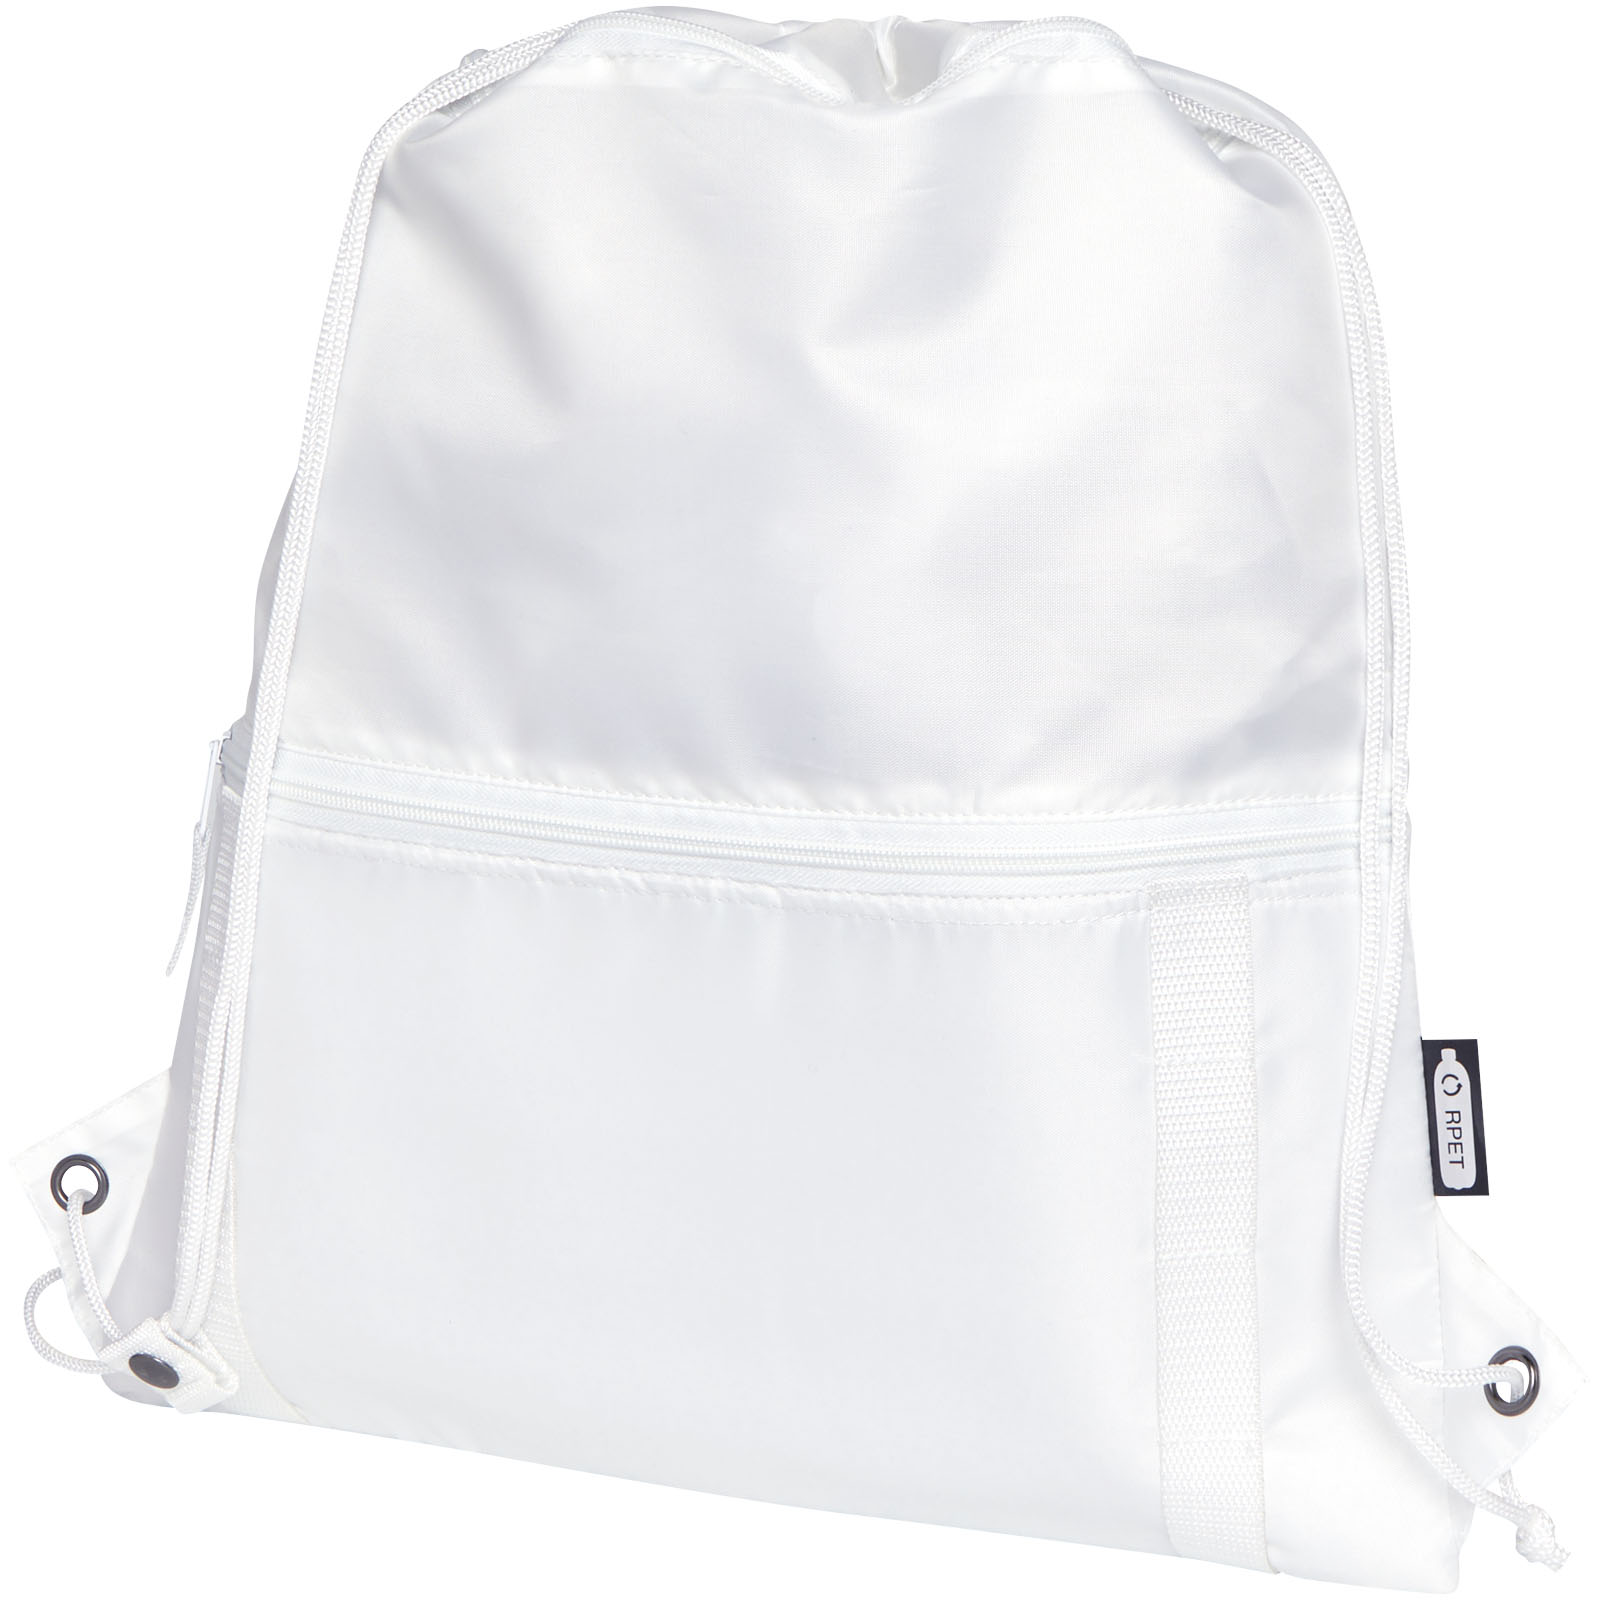 Drawstring Bags - Adventure recycled insulated drawstring bag 9L